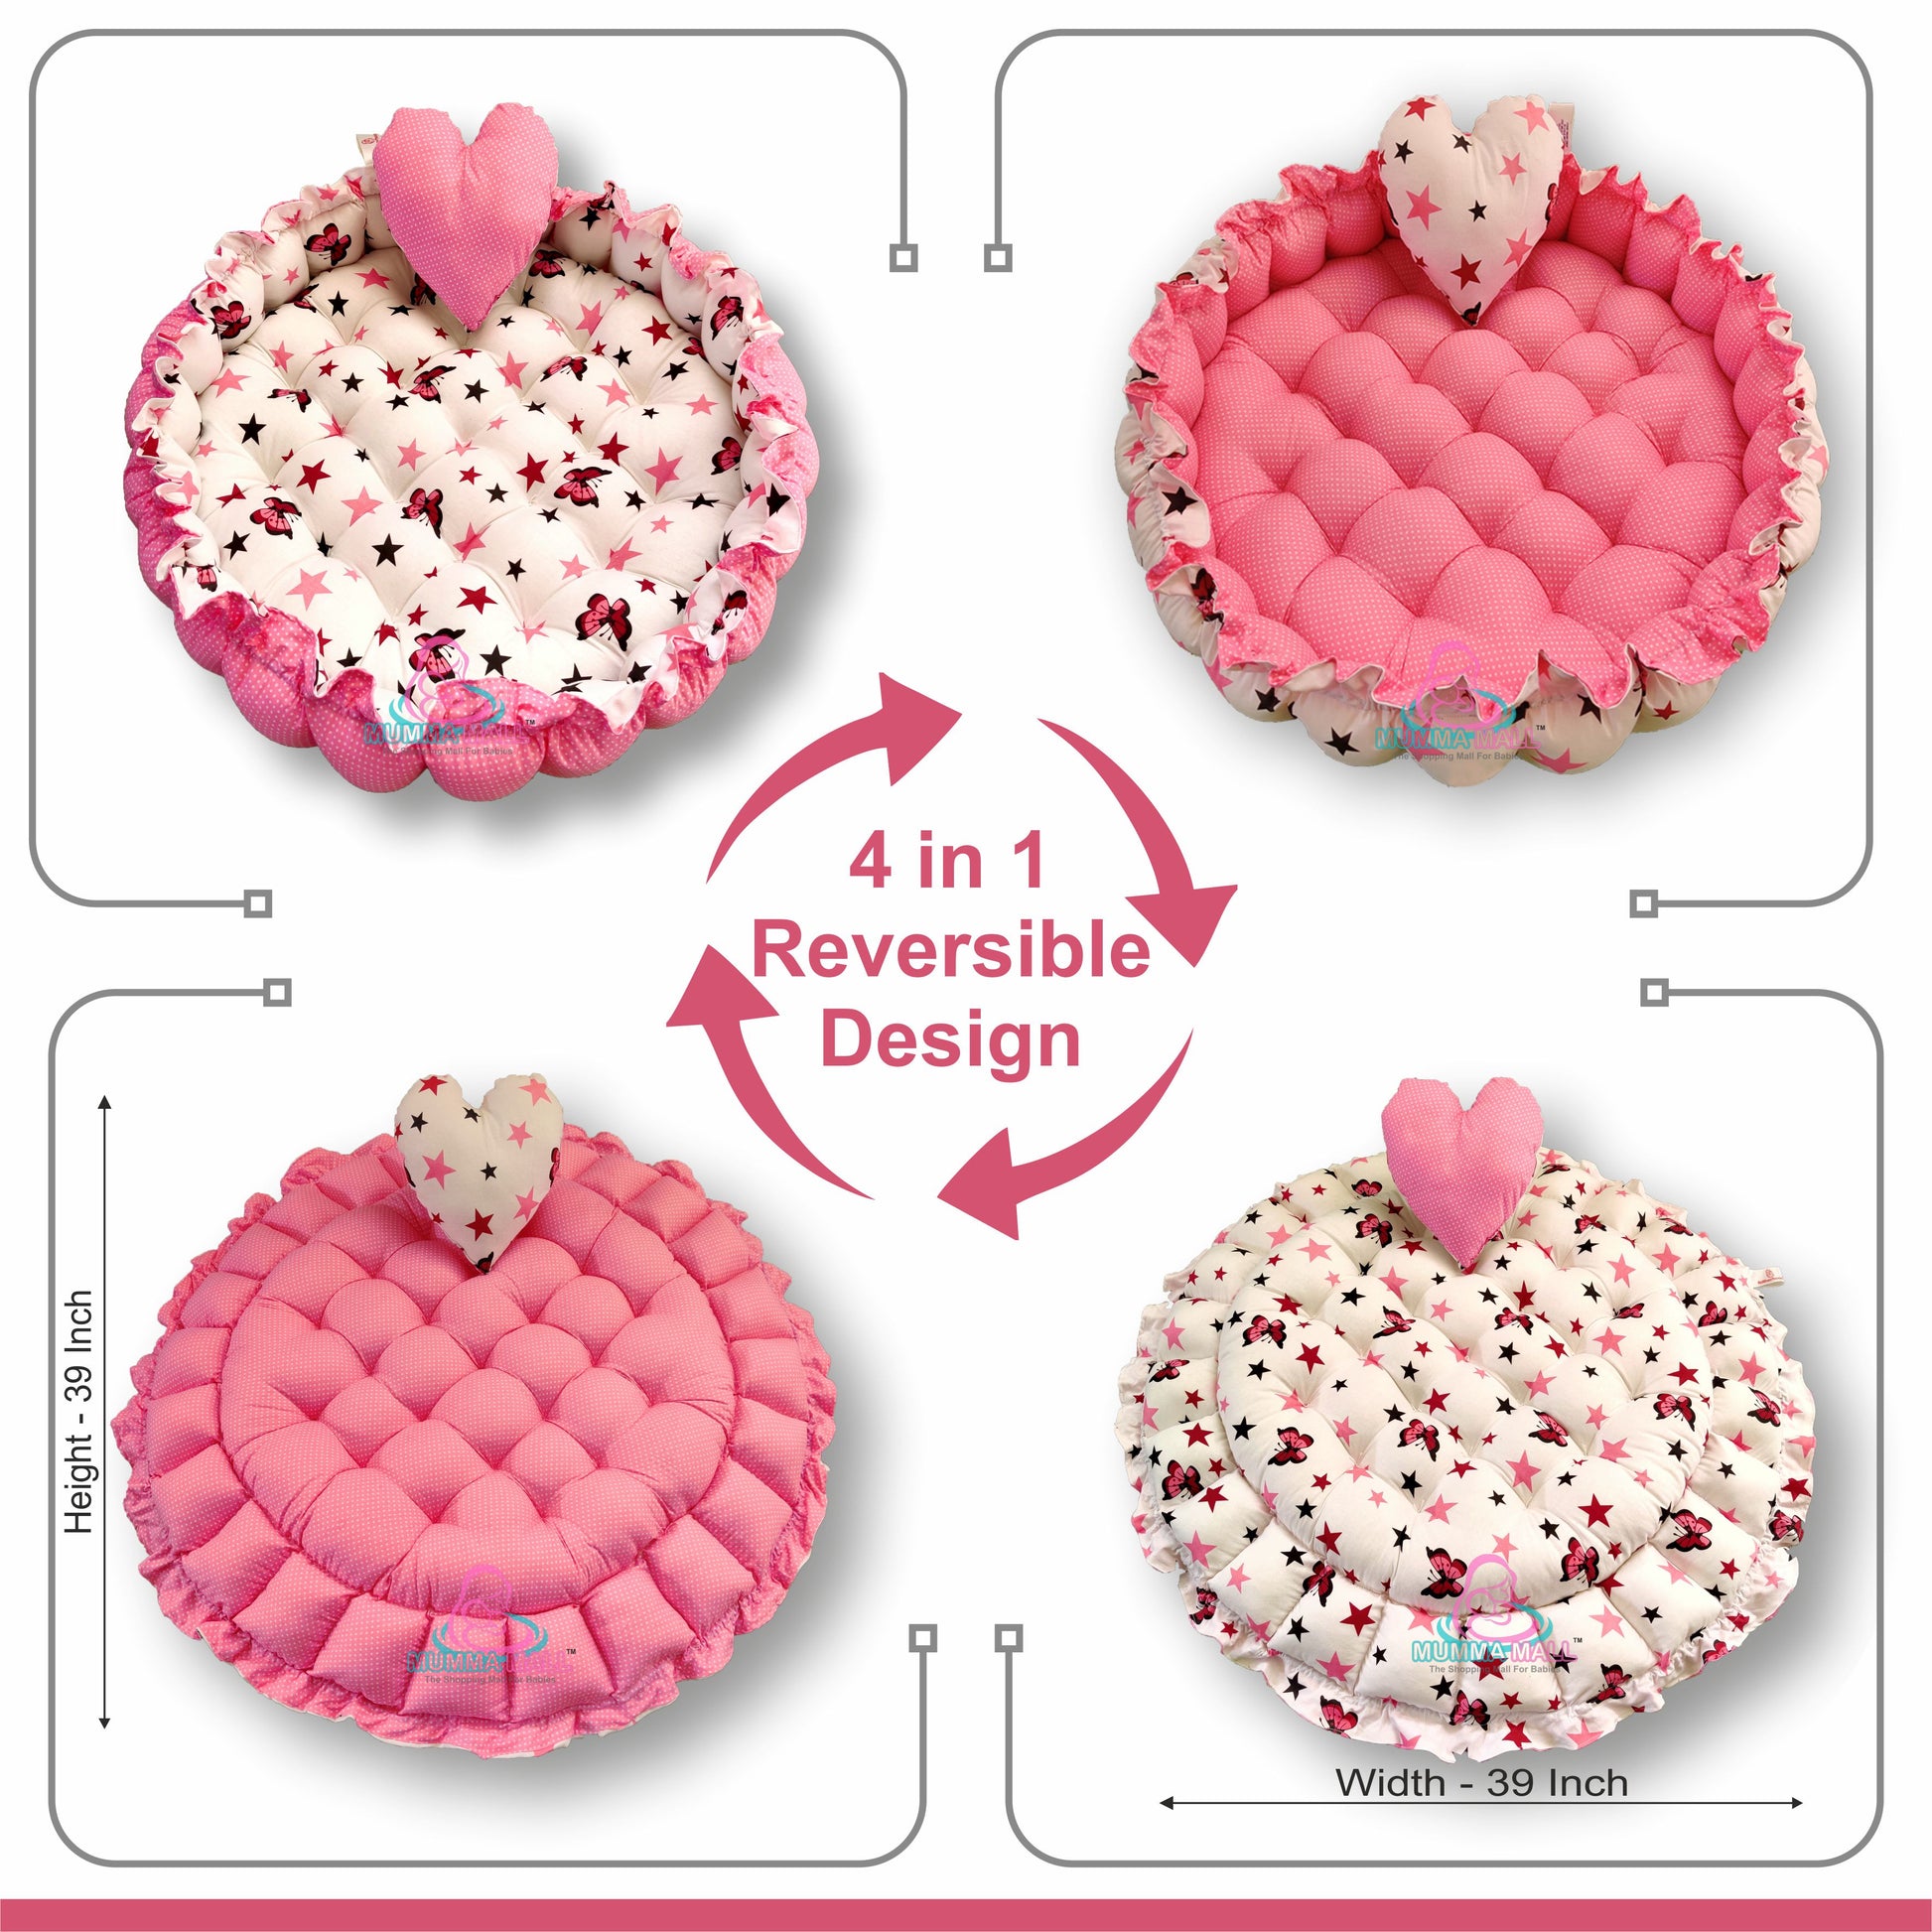 Round baby tub bed with a heart pillow (Pink and White)